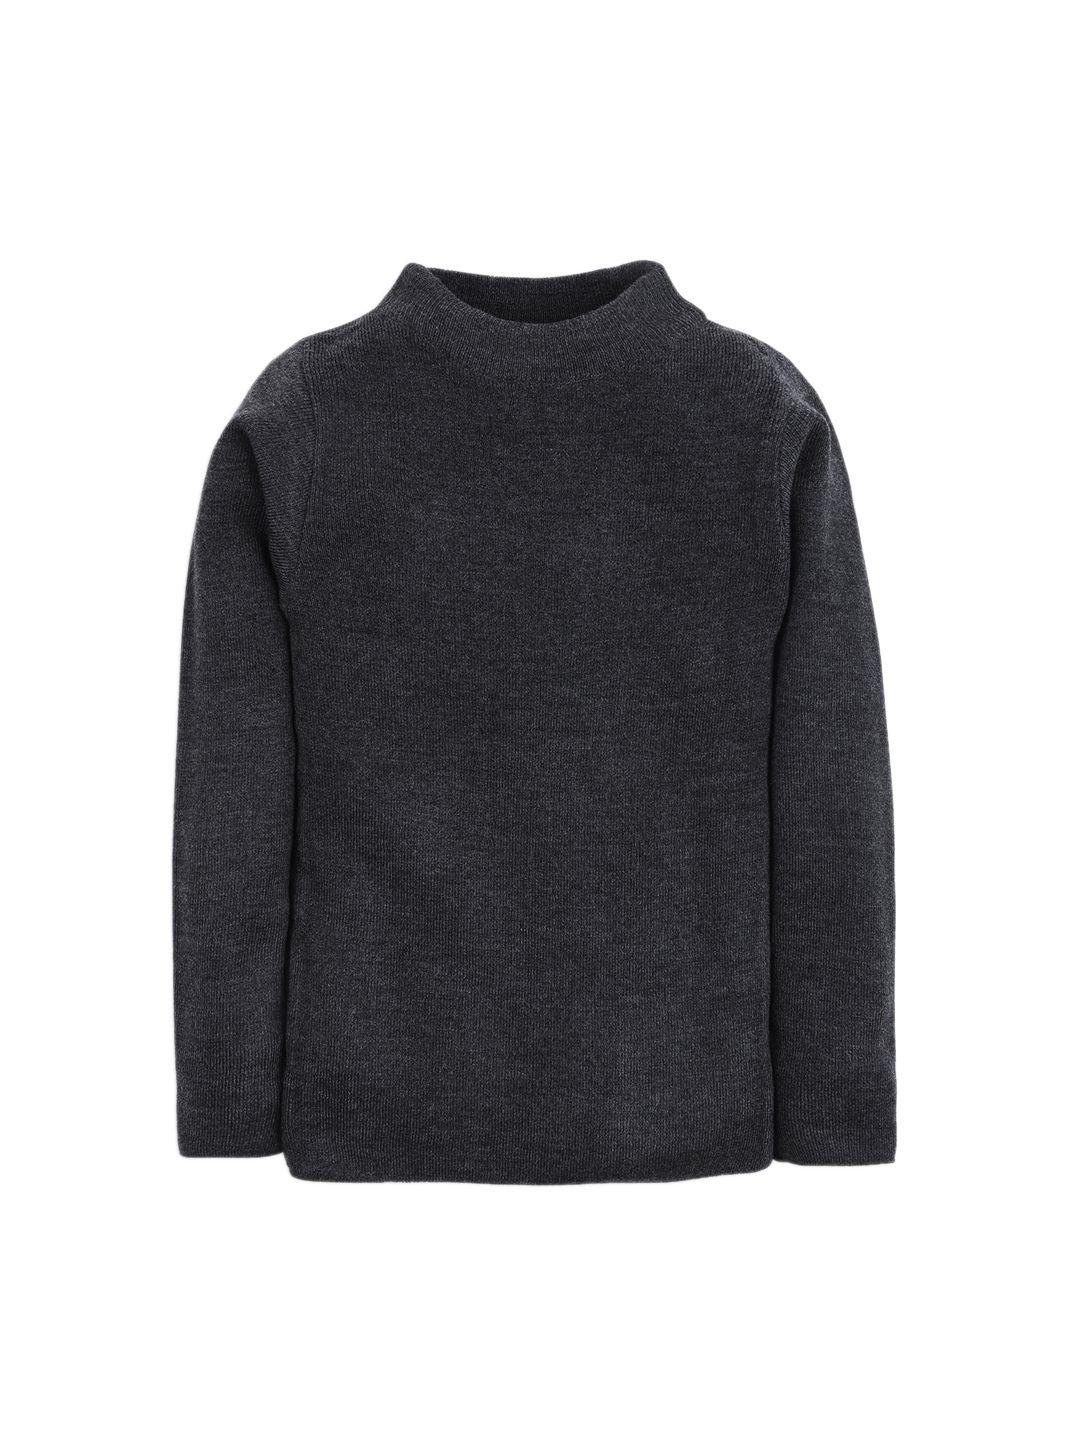 rvk-unisex-charcoal-grey-solid-sweater